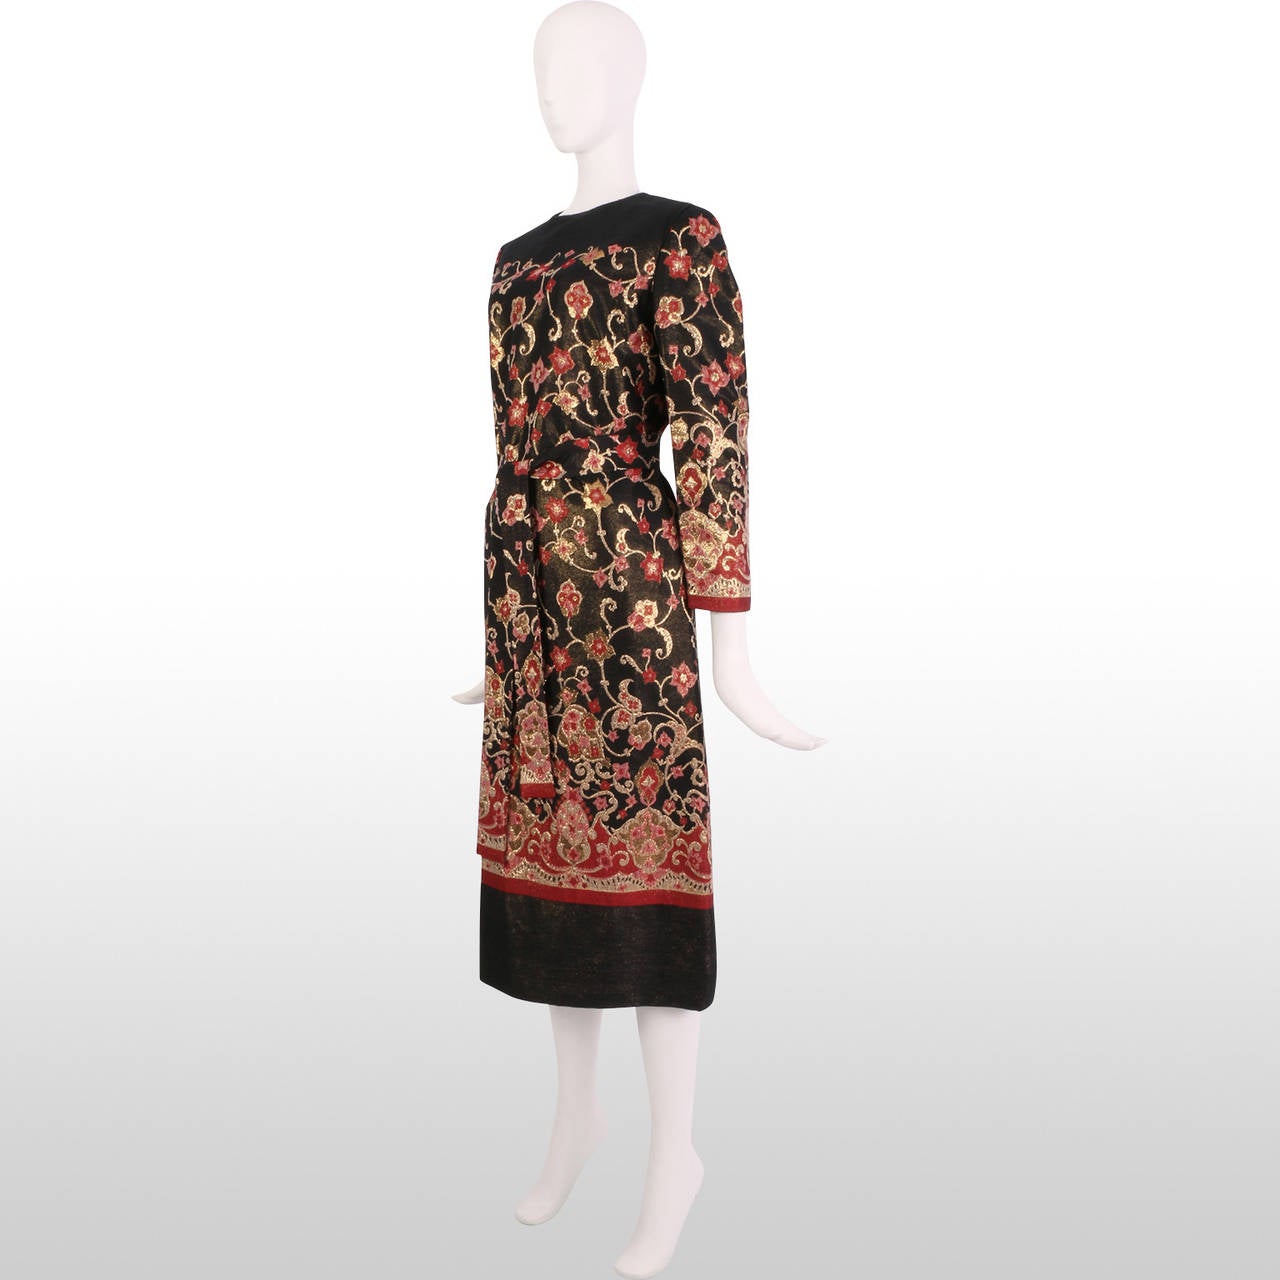 This immaculate 1960's Adele Simpson dress is beautifully made from a black, deep red, magenta and gold floral brocade fabric shot with metallic gold throughout to create a luxurious shimmer. The elegant shift dress can be worn with or without the